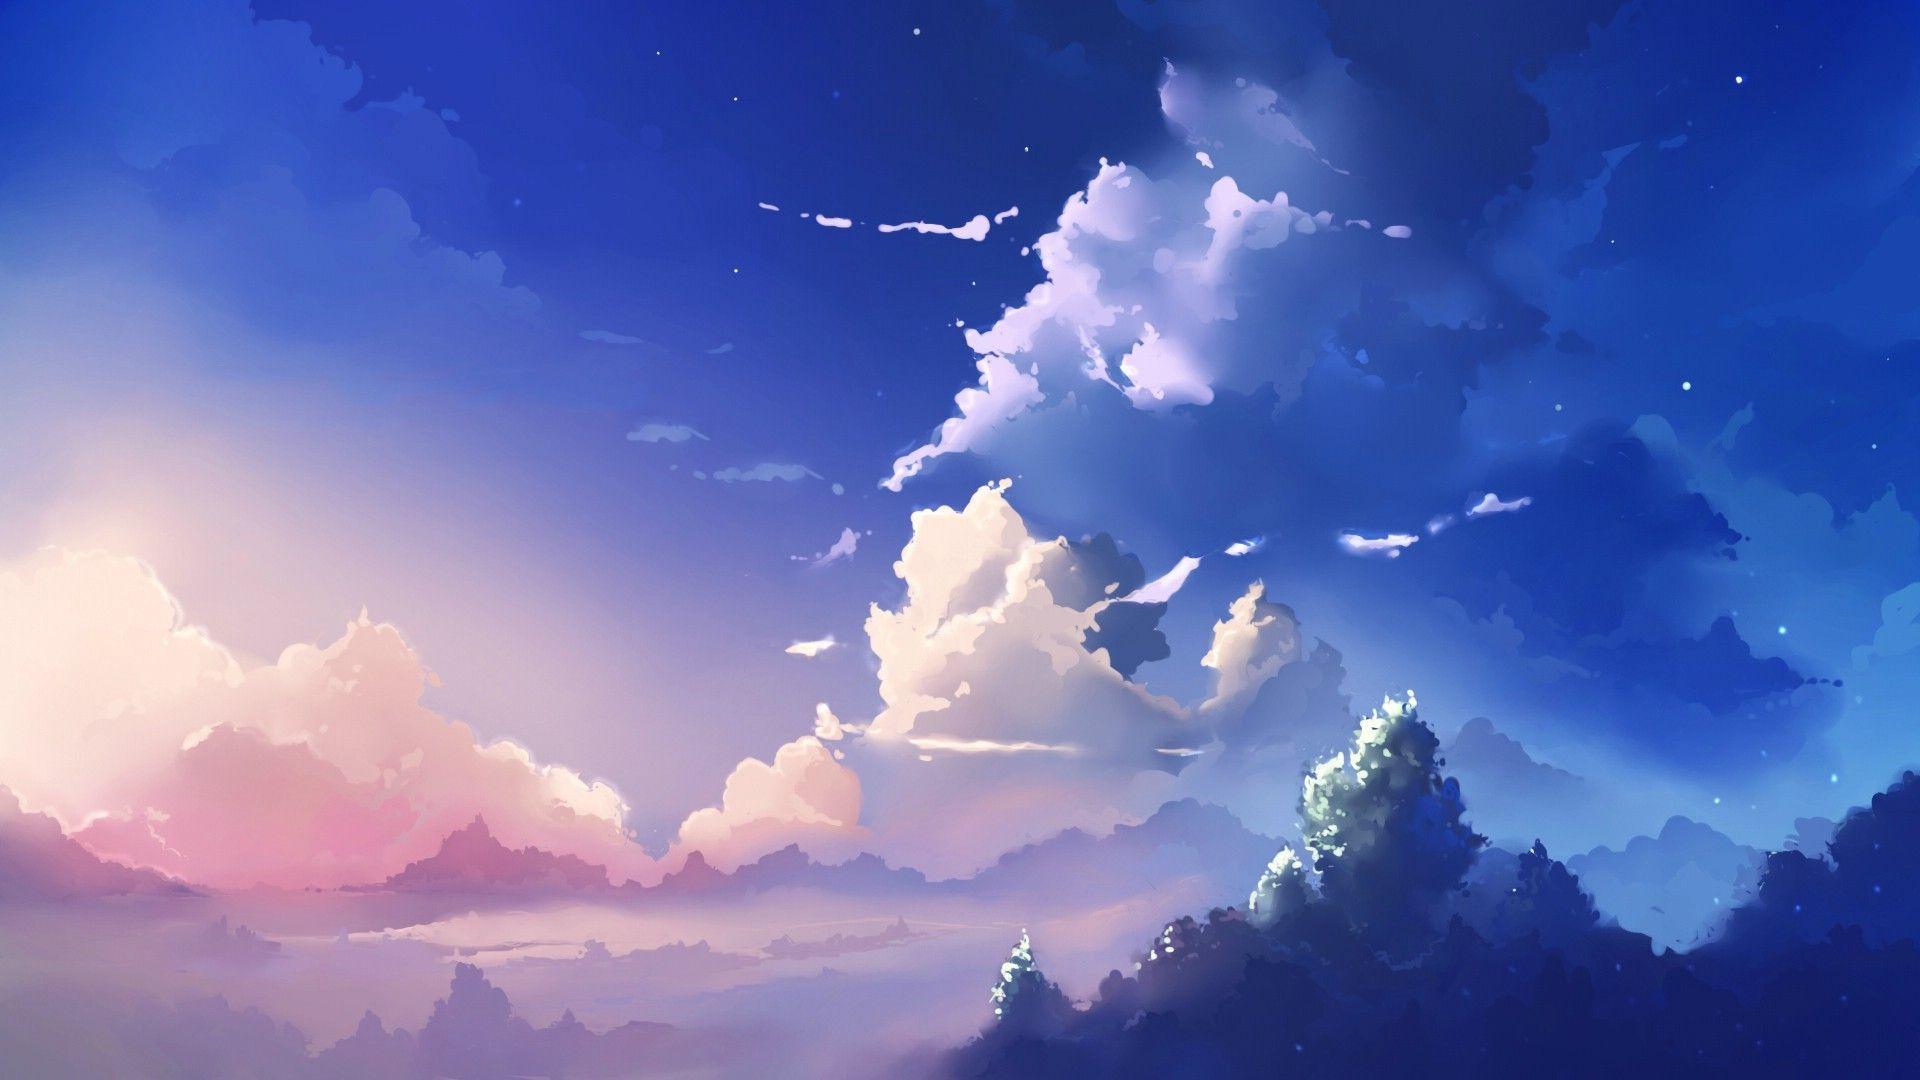 HD Landscape Anime Wallpapers - Top Free HD Landscape Anime Backgrounds - WallpaperAccess